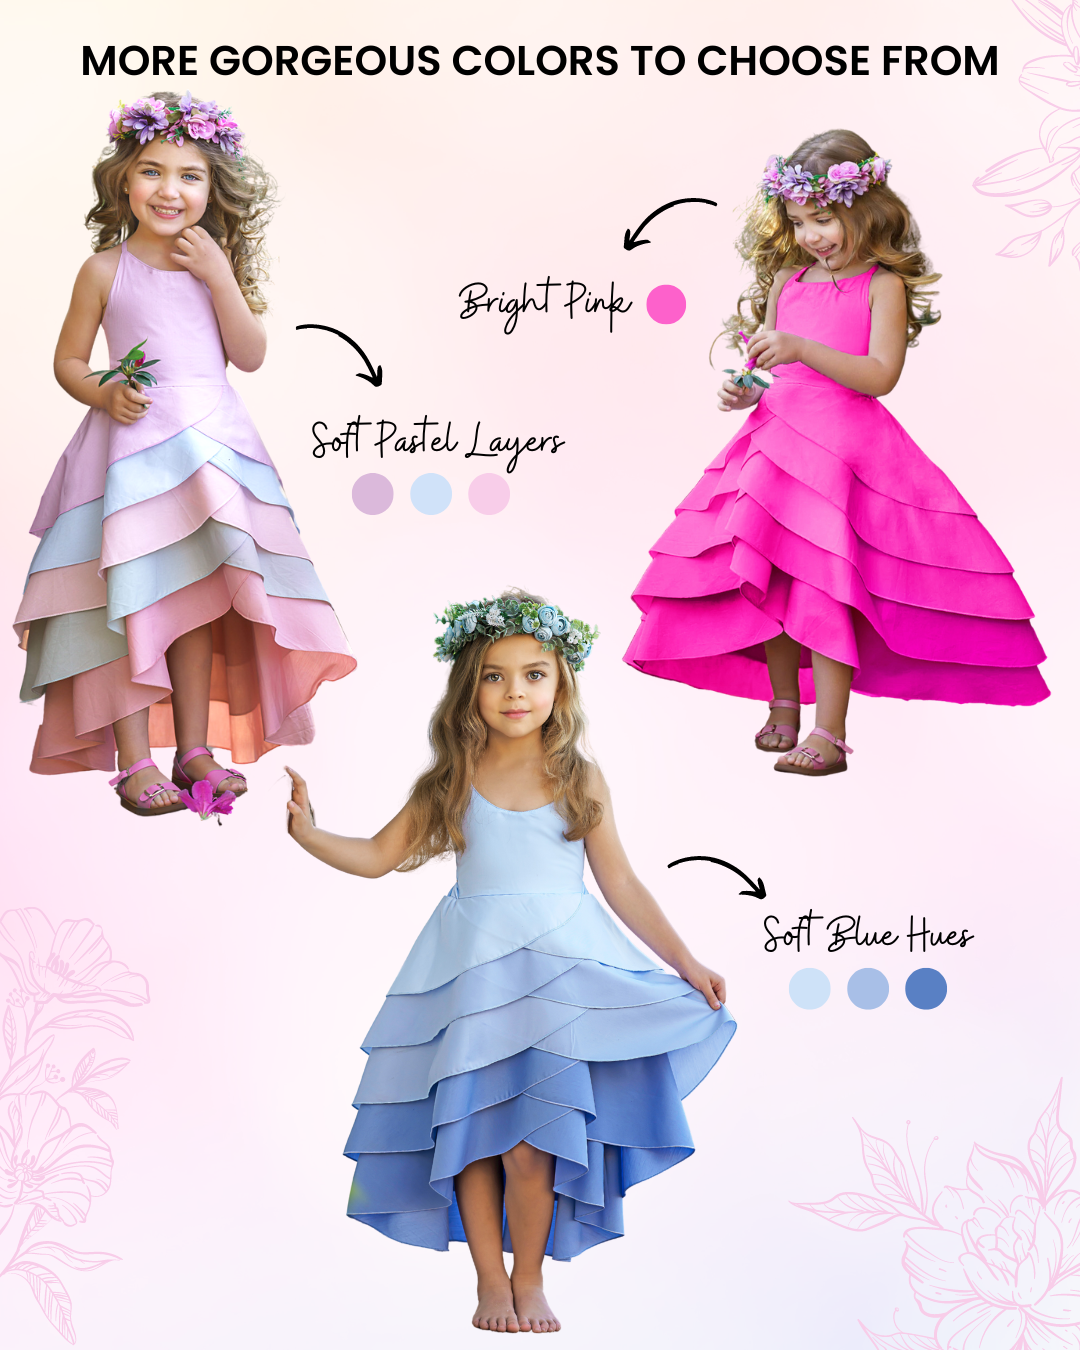 Toddler Spring Outfits | Girls Sleeveless Cotton Candy Tiered Dress